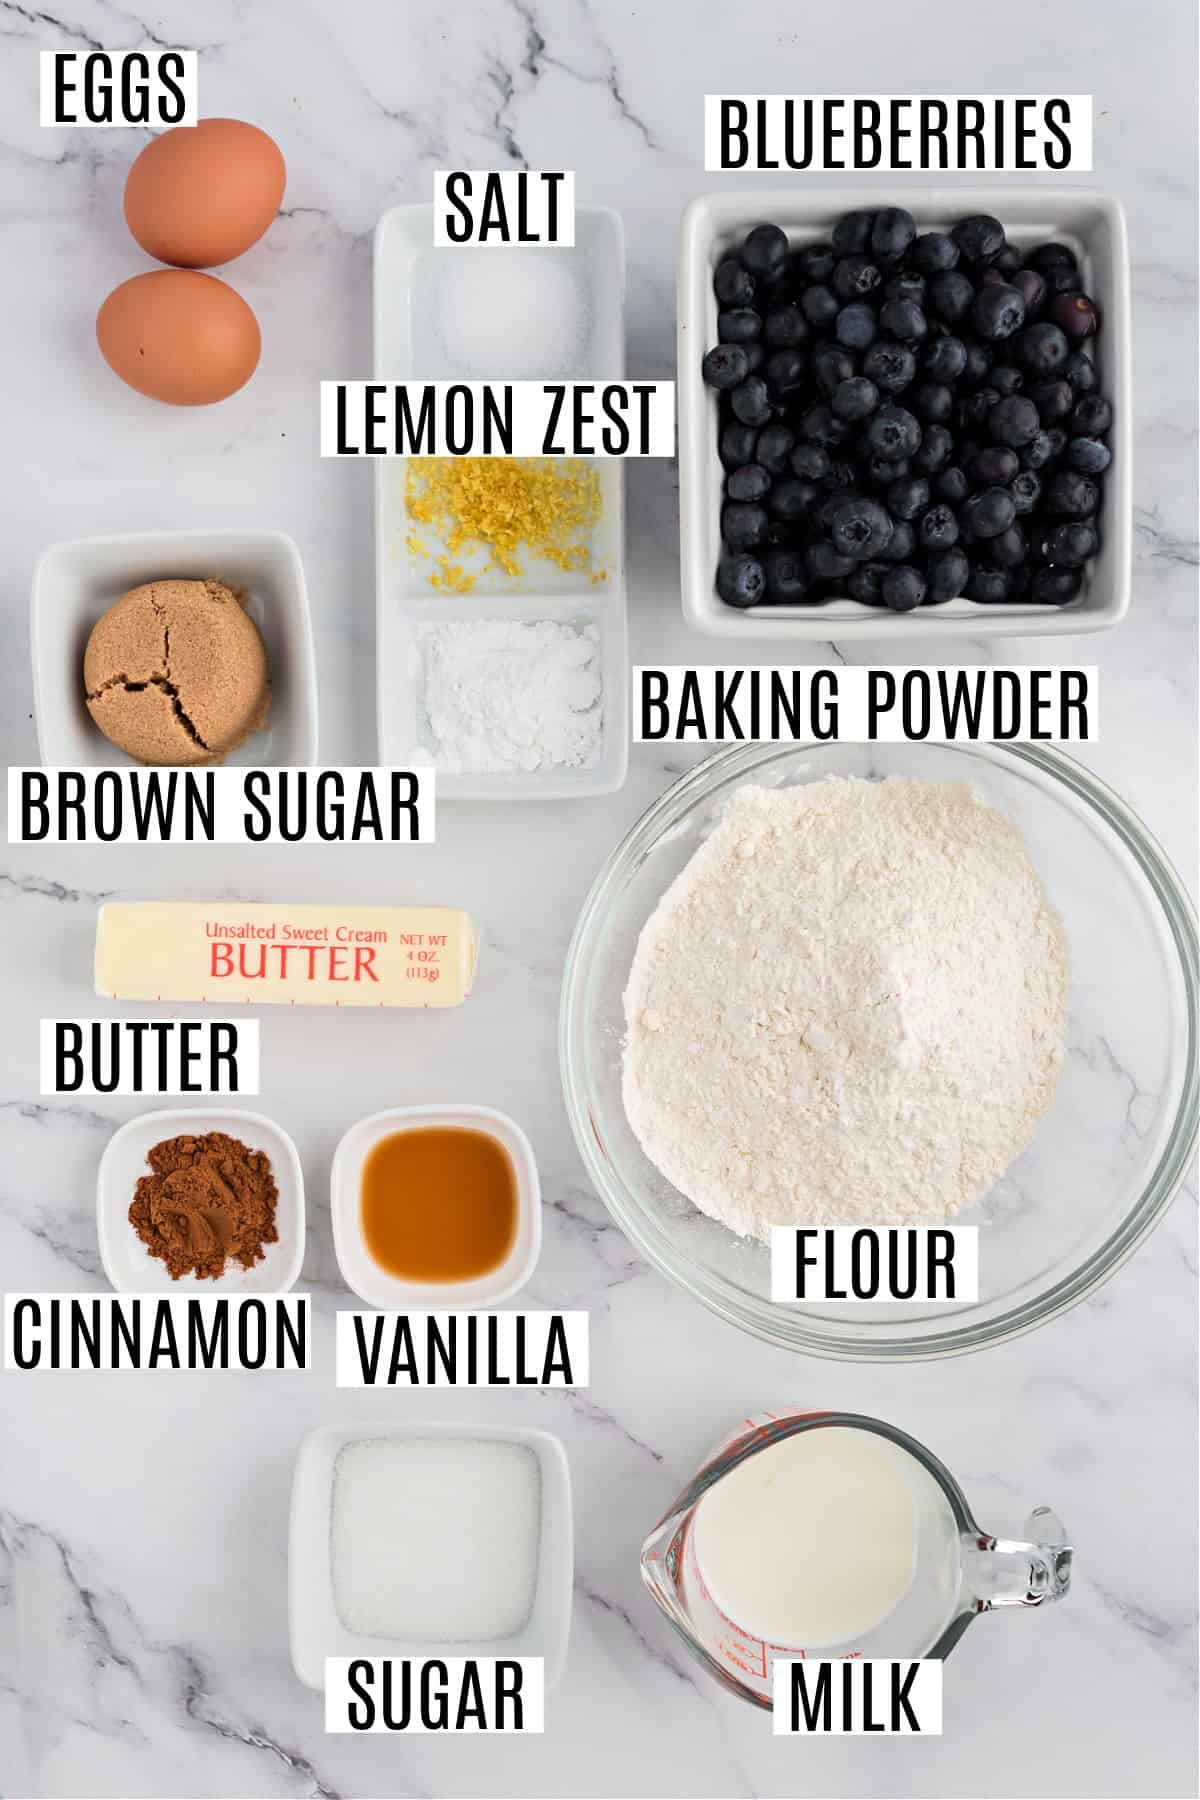 Ingredients needed to make blueberry buckle cake.